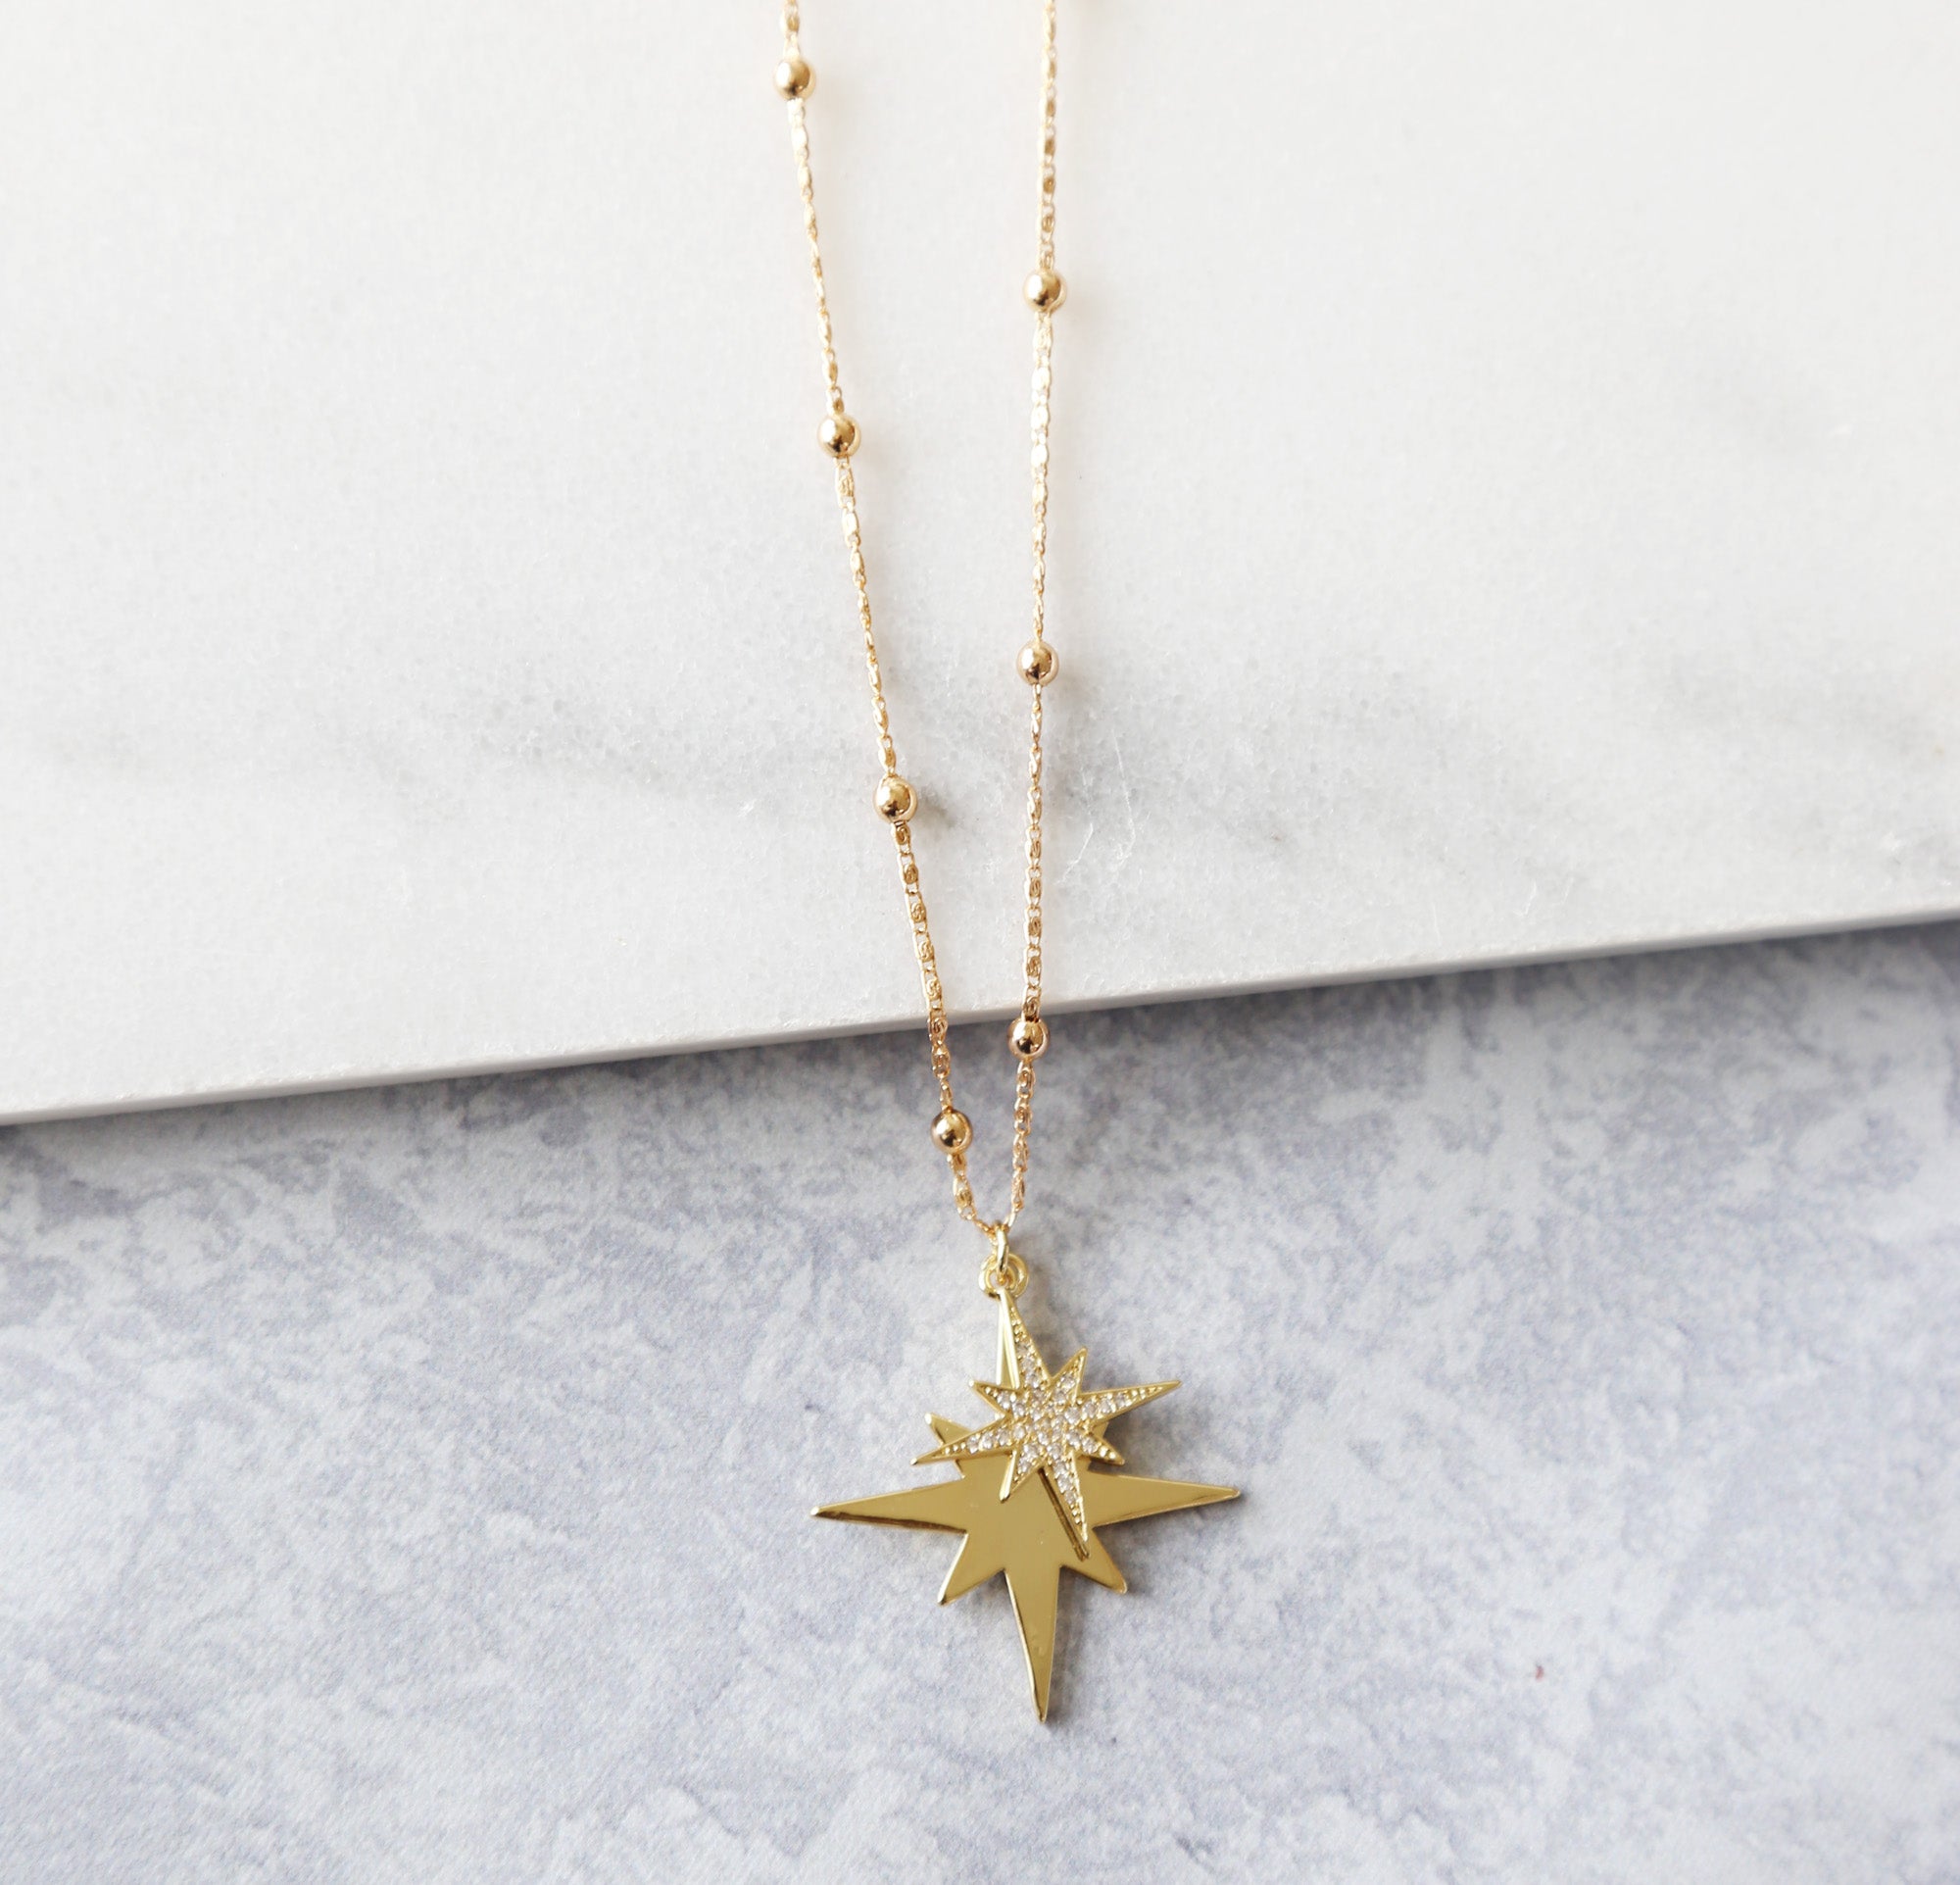 Double Shooting Star Necklace, Gold Necklace, Dainty Gold Jewelry